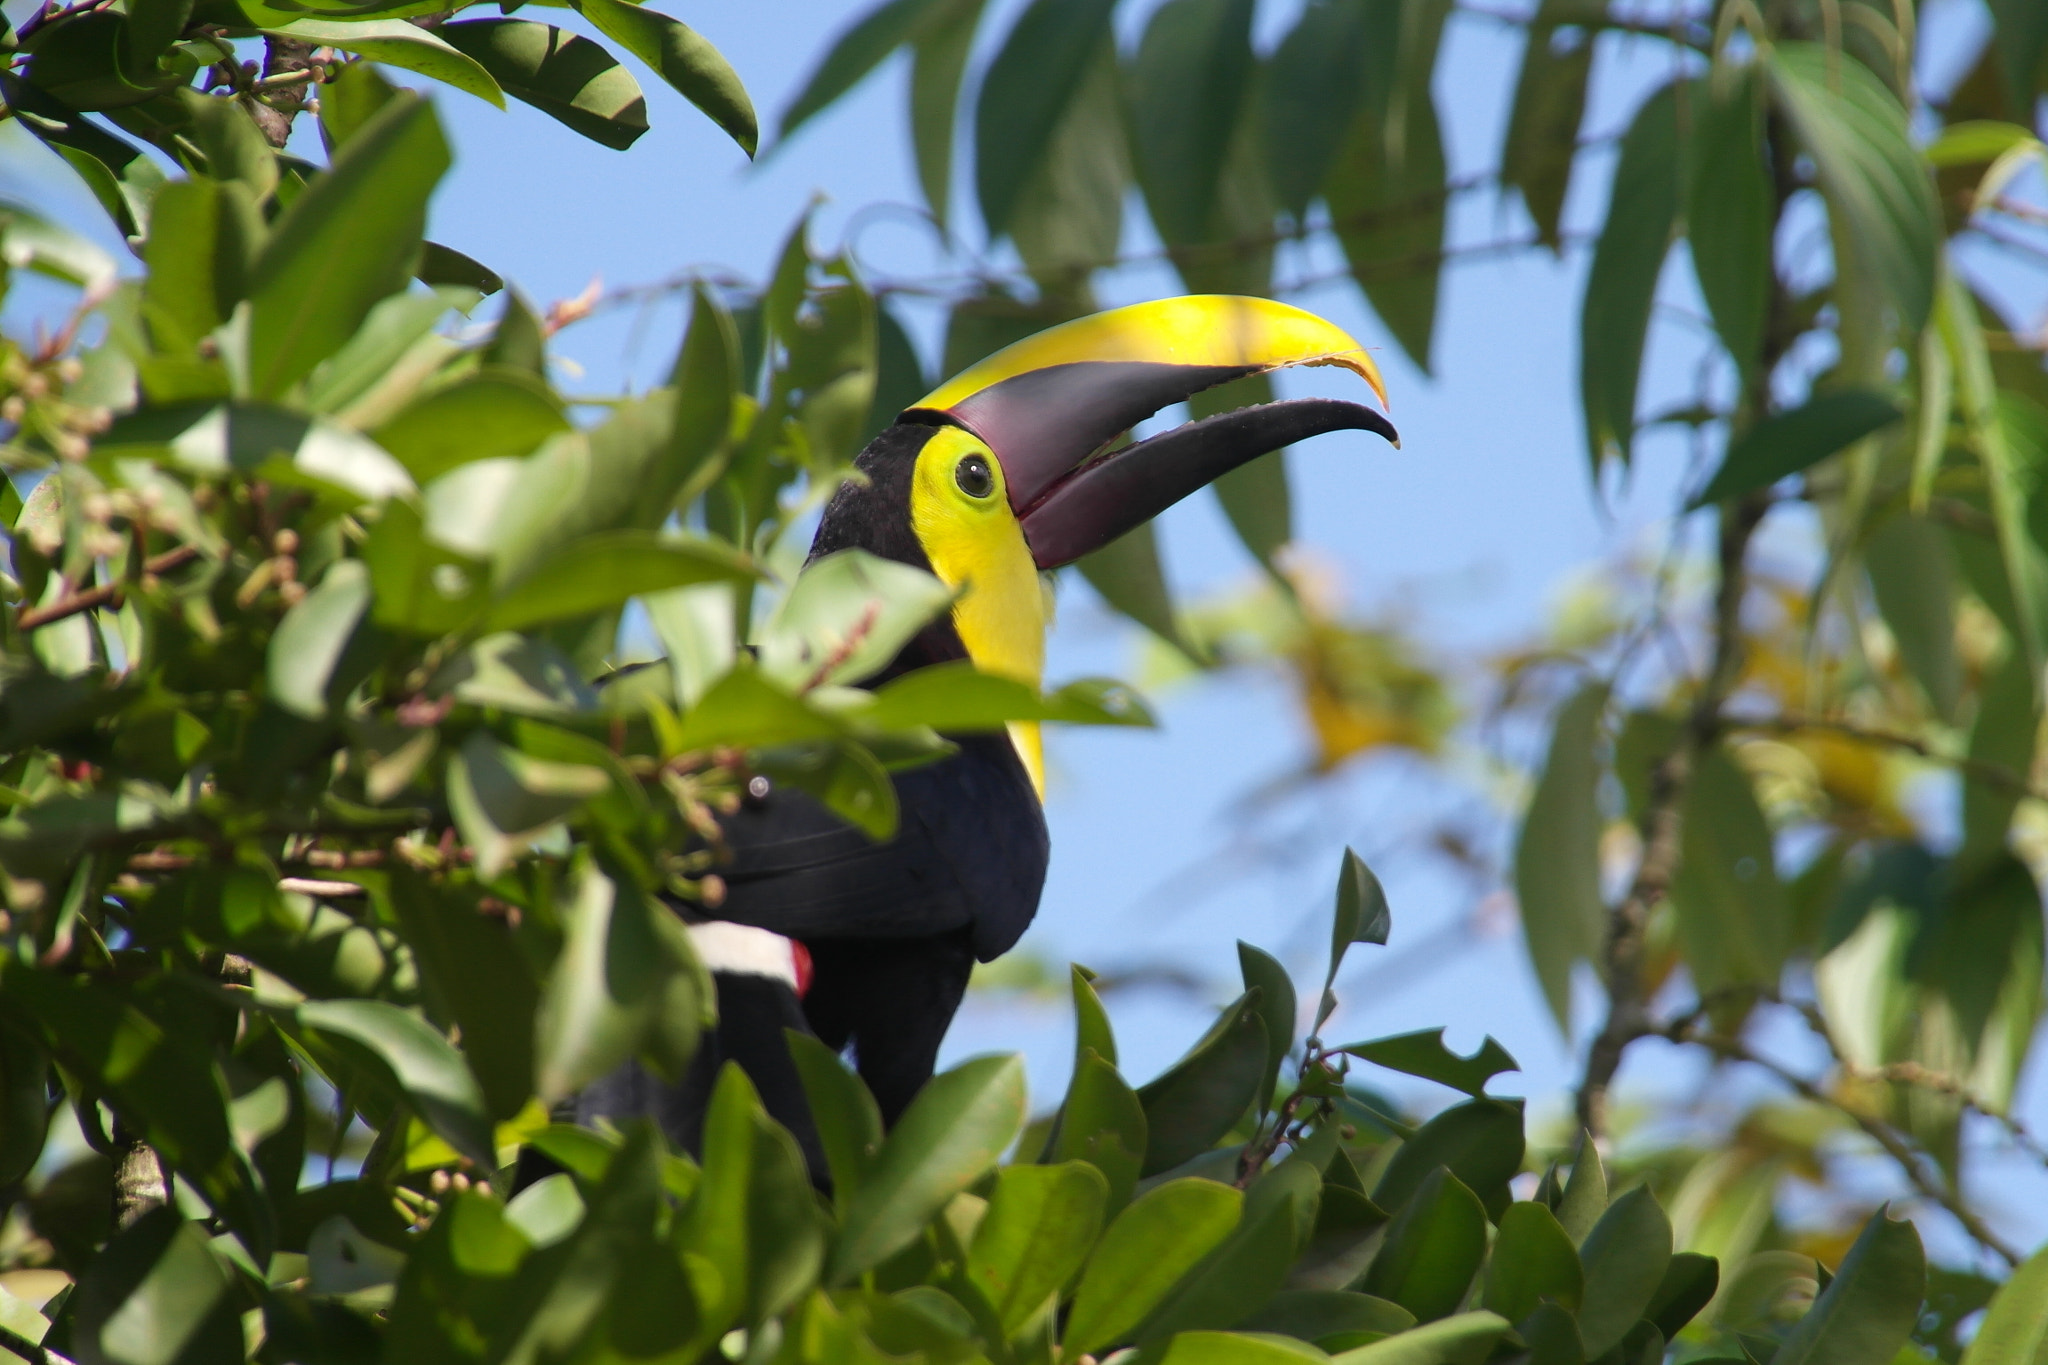 Samsung NX200 sample photo. Yellow-throated toucan eating berries photography